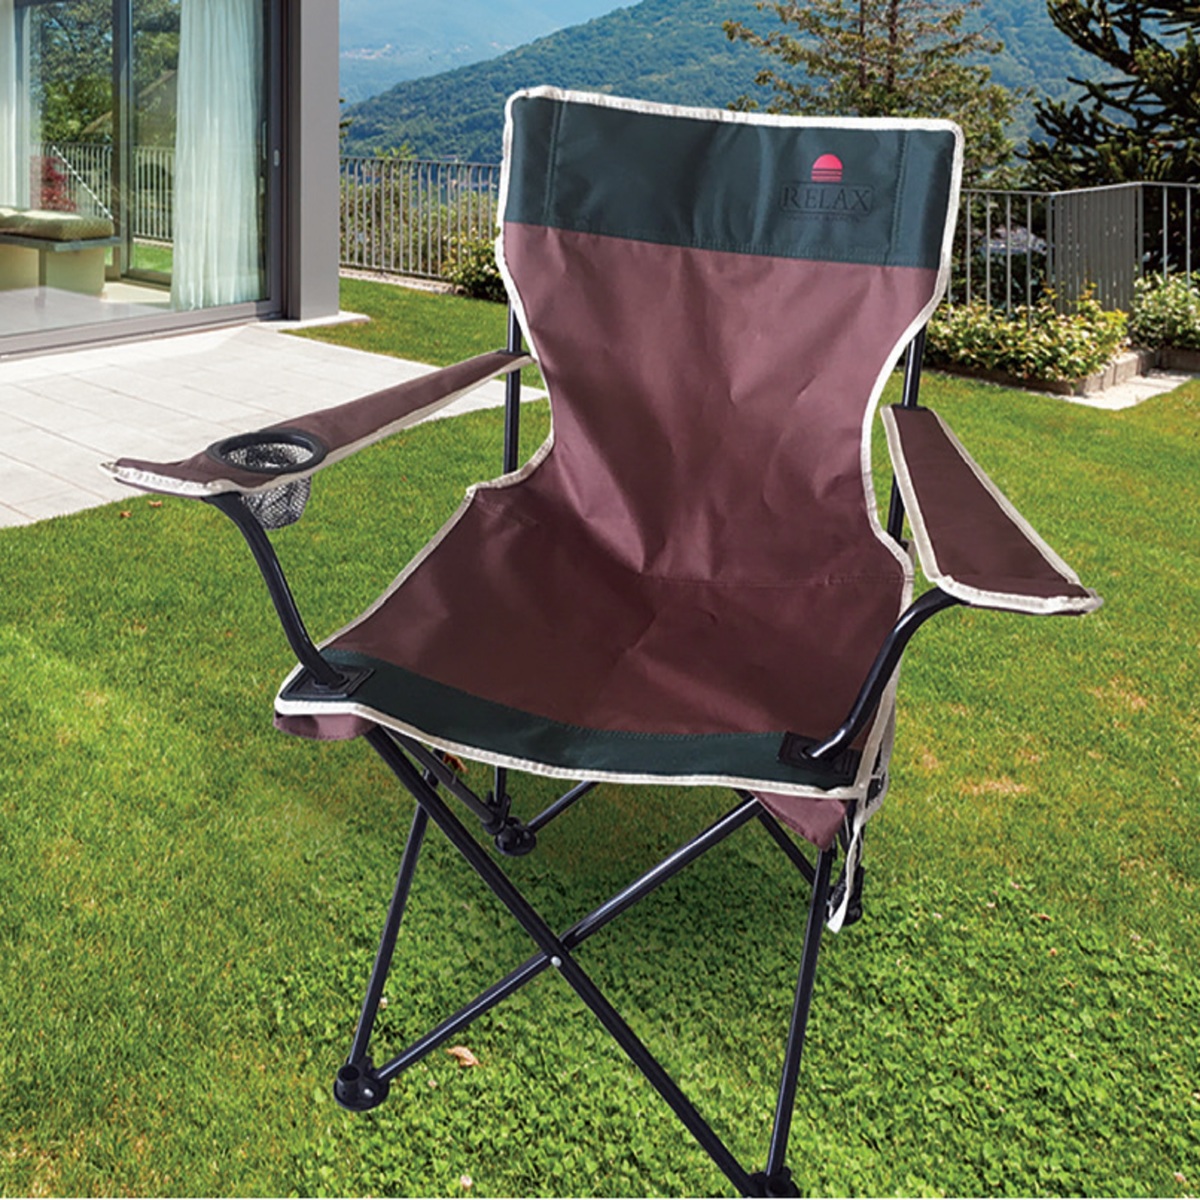 Royal Relax Camping Chair Assorted NHC1305